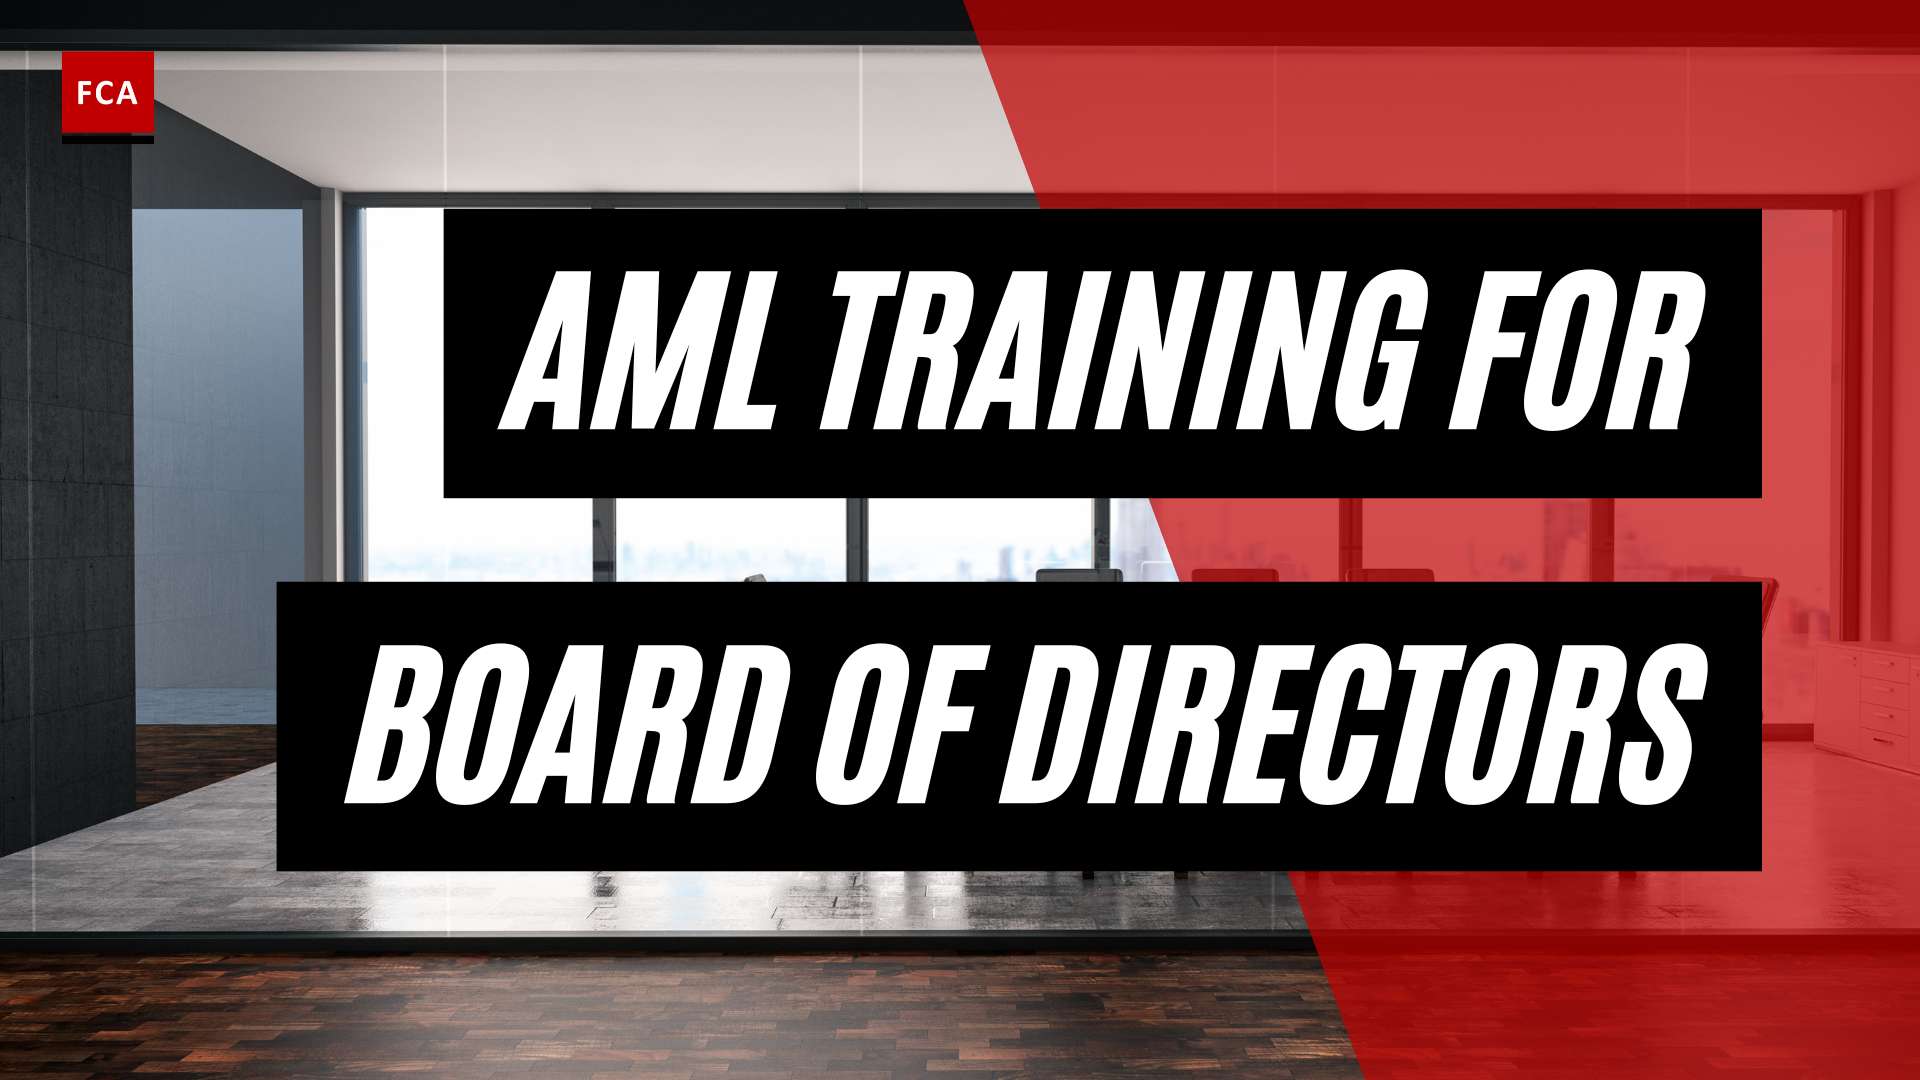 Building A Resilient Frontline: Aml Training For Board Of Directors